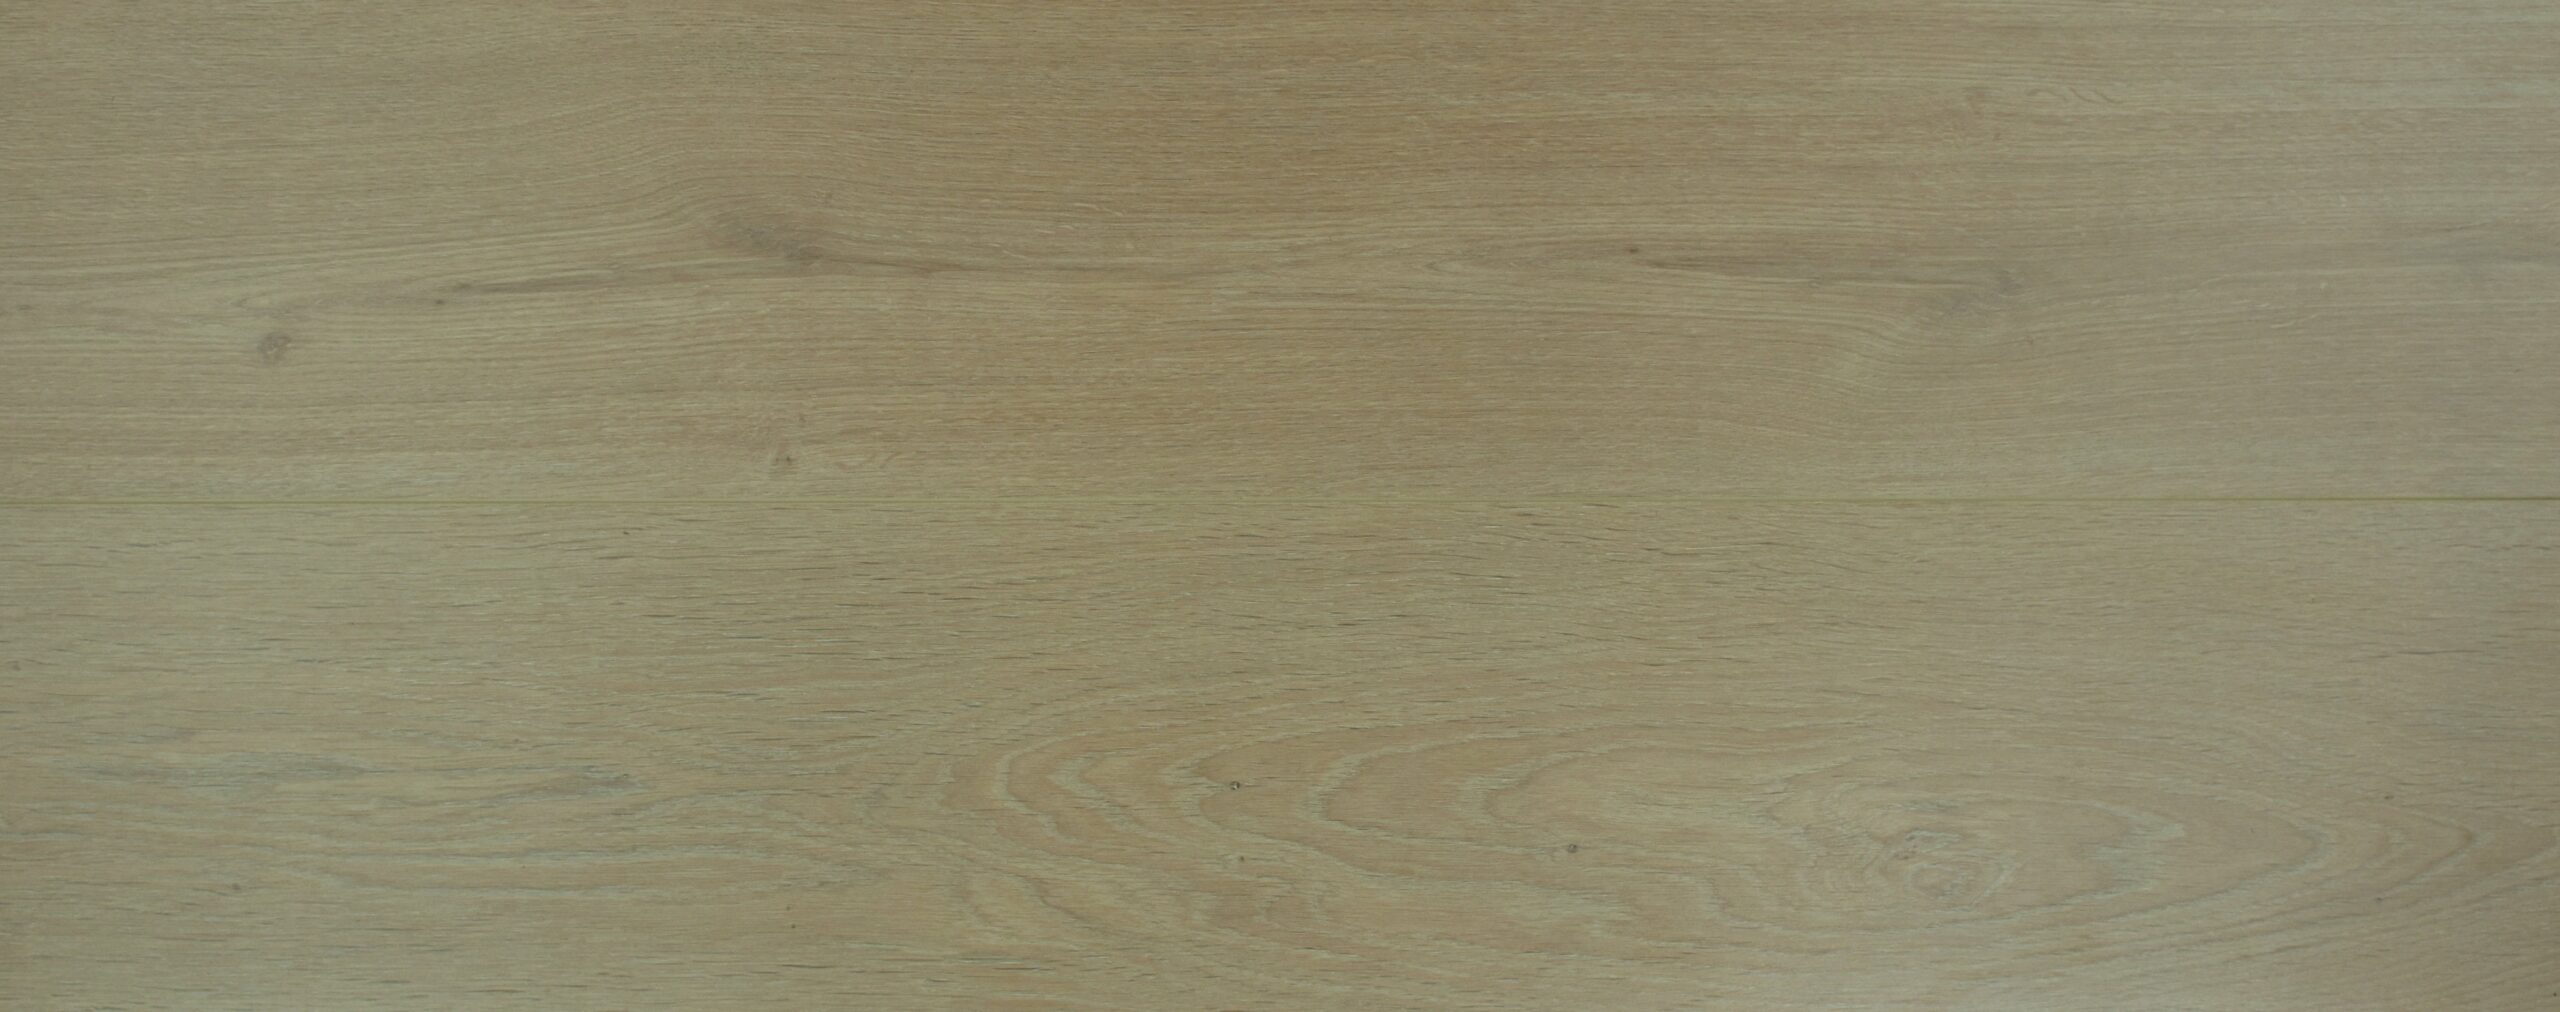 Light White Oak Trident Laminate Flooring with Built-In EIR Backing and AC4 wear layer